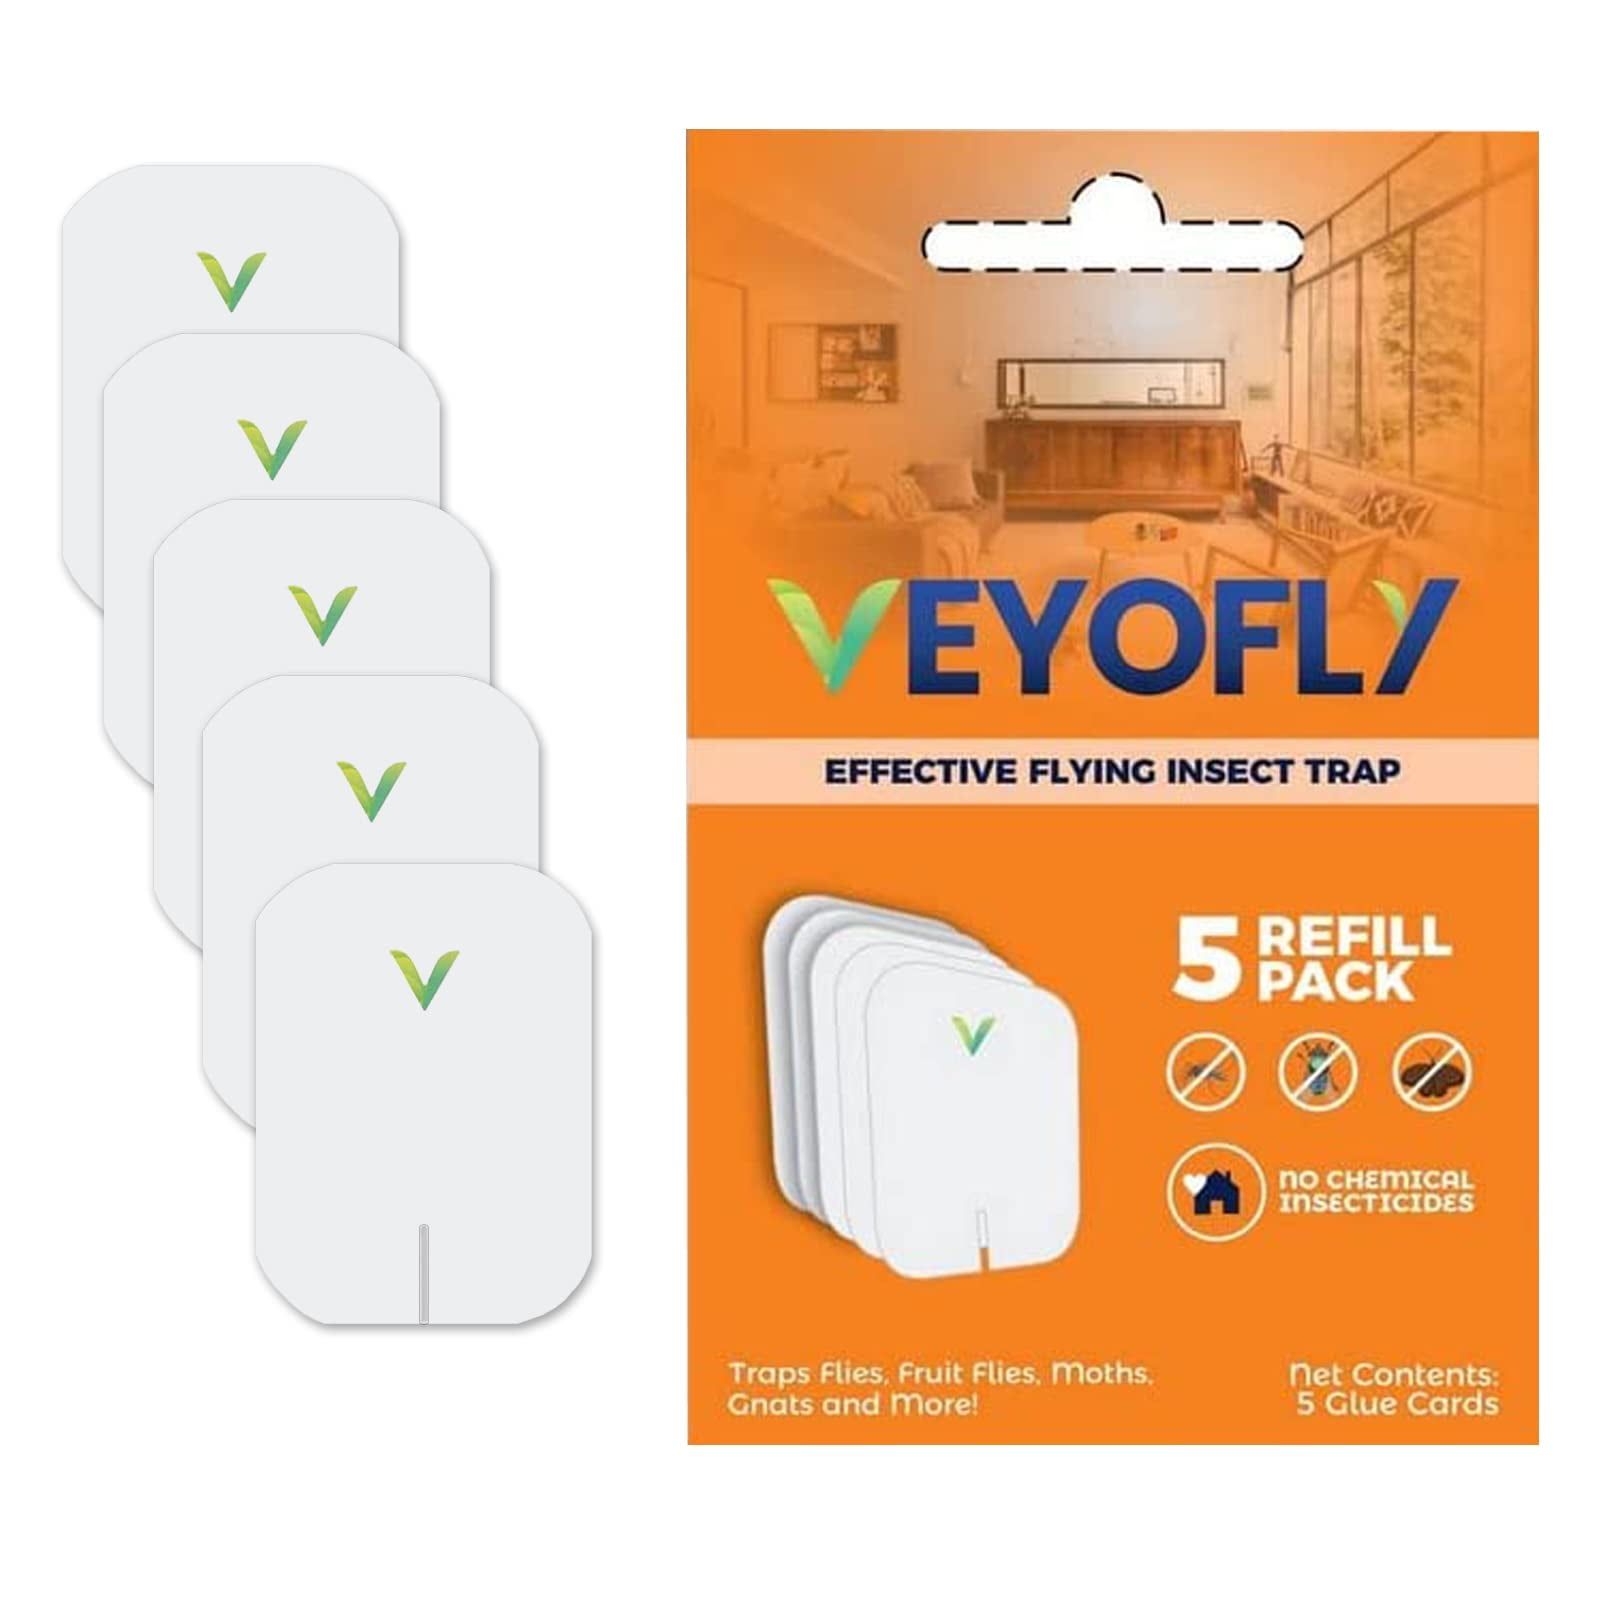 Veyofly Flying Insect Trap, Refill 5PK Color-White Model-VF01 